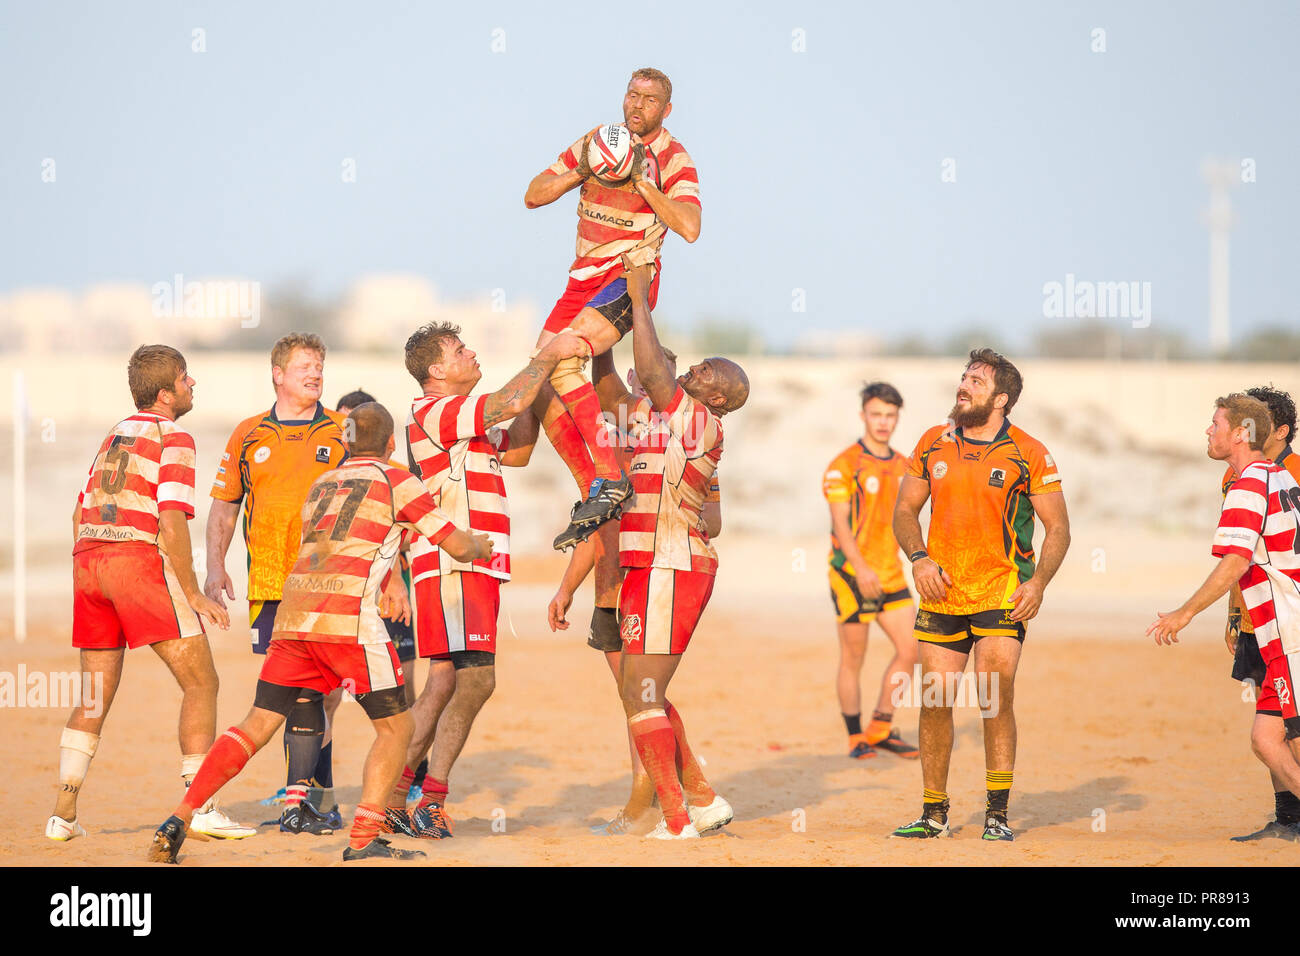 December 16, 2016 - Ras Al Khaimah, Ras Al Khaimah, United Arab Emirates - Team players seen in action at their sand pitch during the game.Rugby in RAK has been reported to have been played in the region since 1969 in various forms, the senior men's team is currently playing in the Community League in the UAE and also it has a youth team as well as a woman's sevens team. The remarkable thing about the RAK Rugby Club is that their home ground is a sand pitch located at Bin Majid Resort in Ras Al Khaimah, their seasons run from September to April every year and it's governed by the UAE Rugb Stock Photo